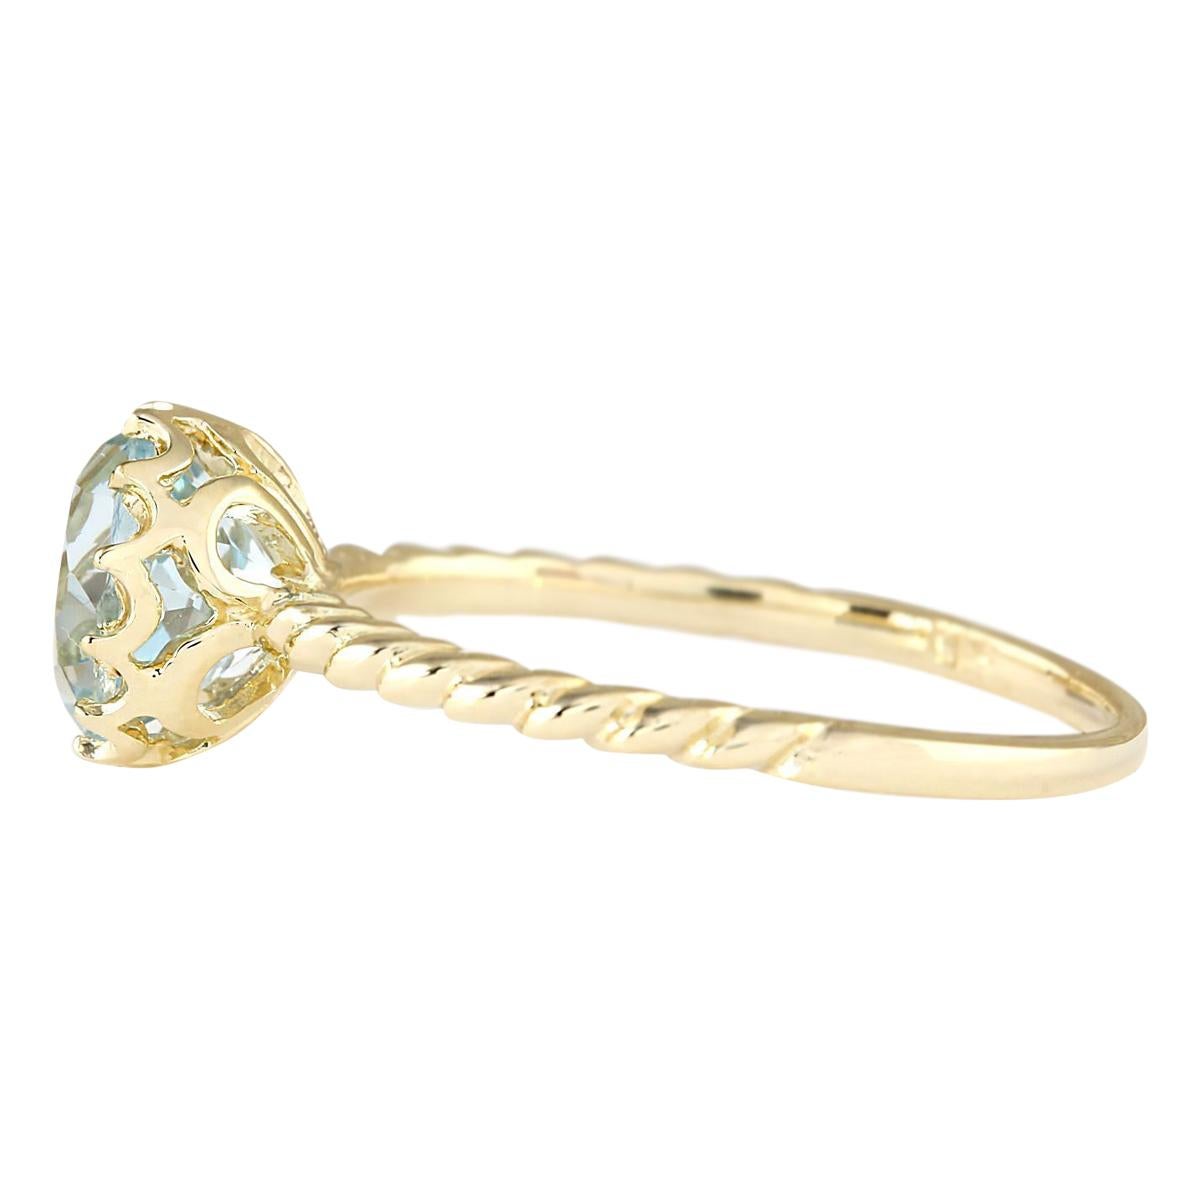 Indulge in the serene beauty of our 1.50 Carat Natural Aquamarine Ring, meticulously crafted in radiant 14K Yellow Gold. Stamped with the distinguished 14K stamp, ensuring its authenticity. With a total weight of 1.8 grams, this ring is both